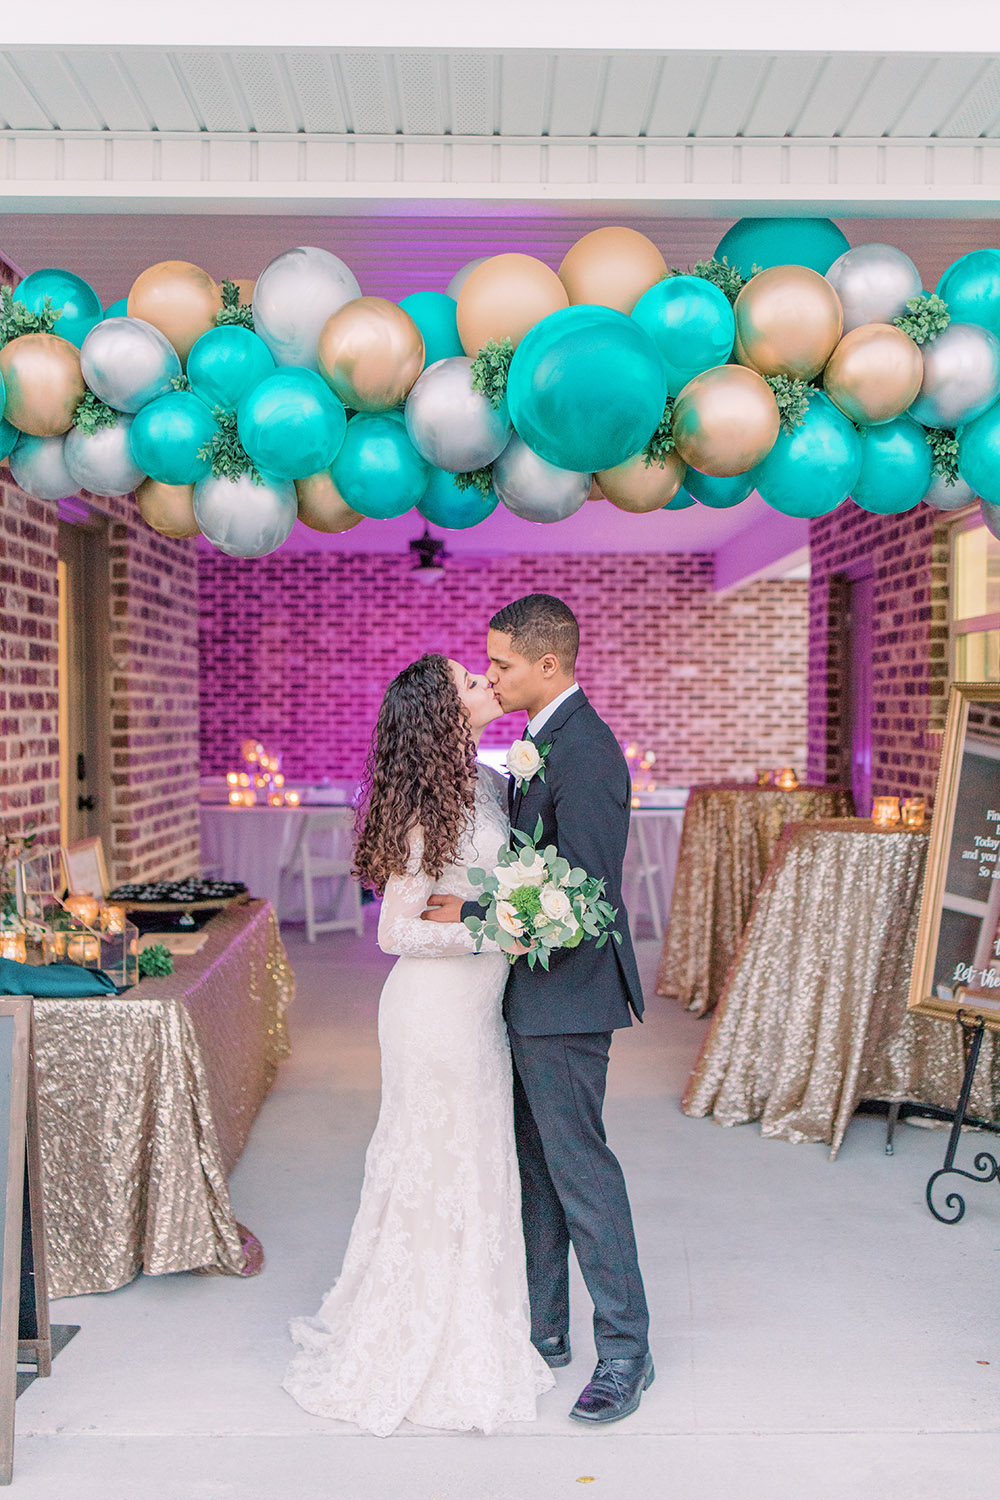 The newly wed couple embrace and kiss under the balloon arch. Photo: Ashley Kristen Photography